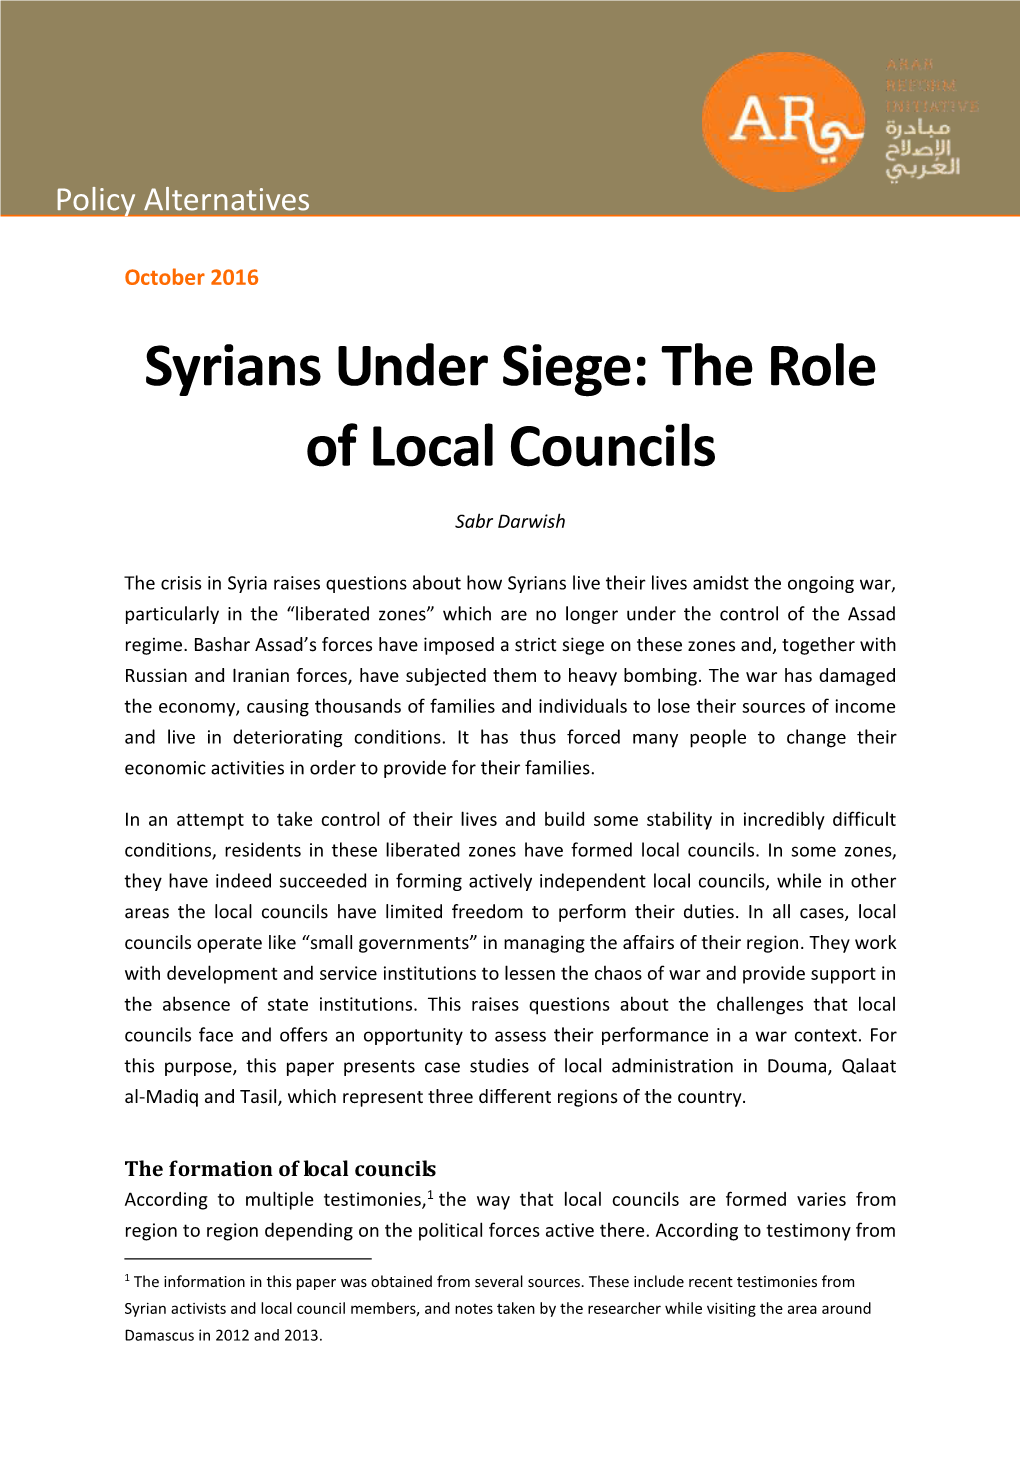 Syrians Under Siege: the Role of Local Councils